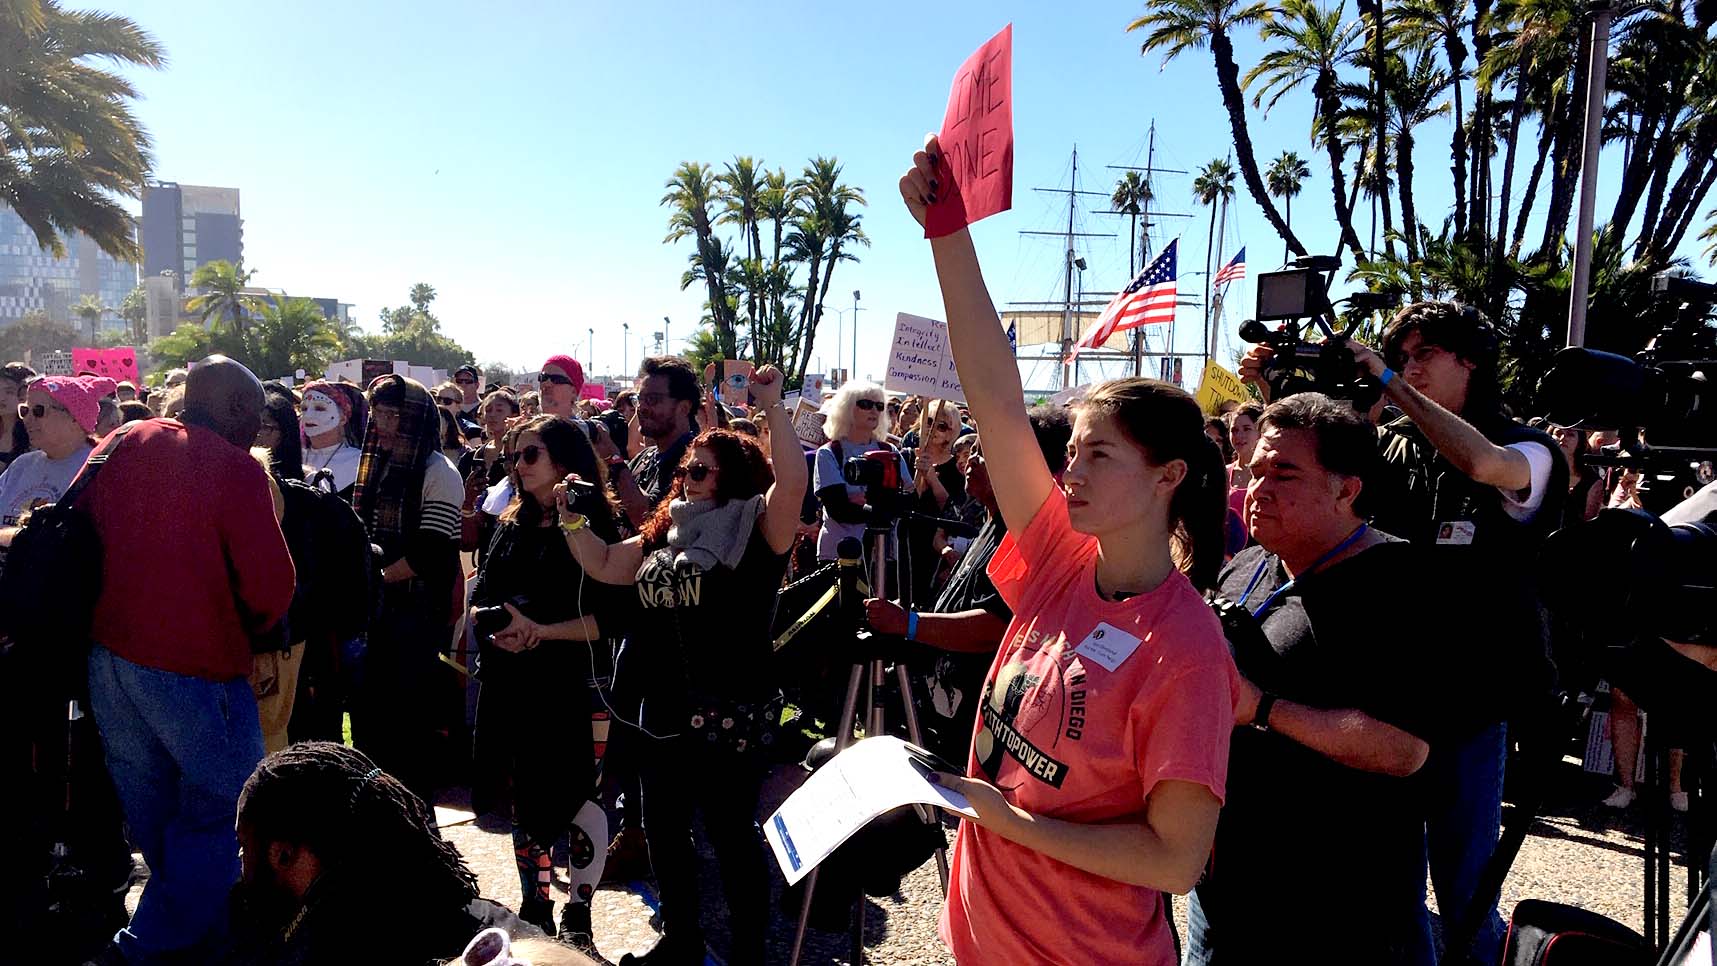 San Diego Women's March: Thousands at 'Truth to Power' Event Downtown - Times of San Diego